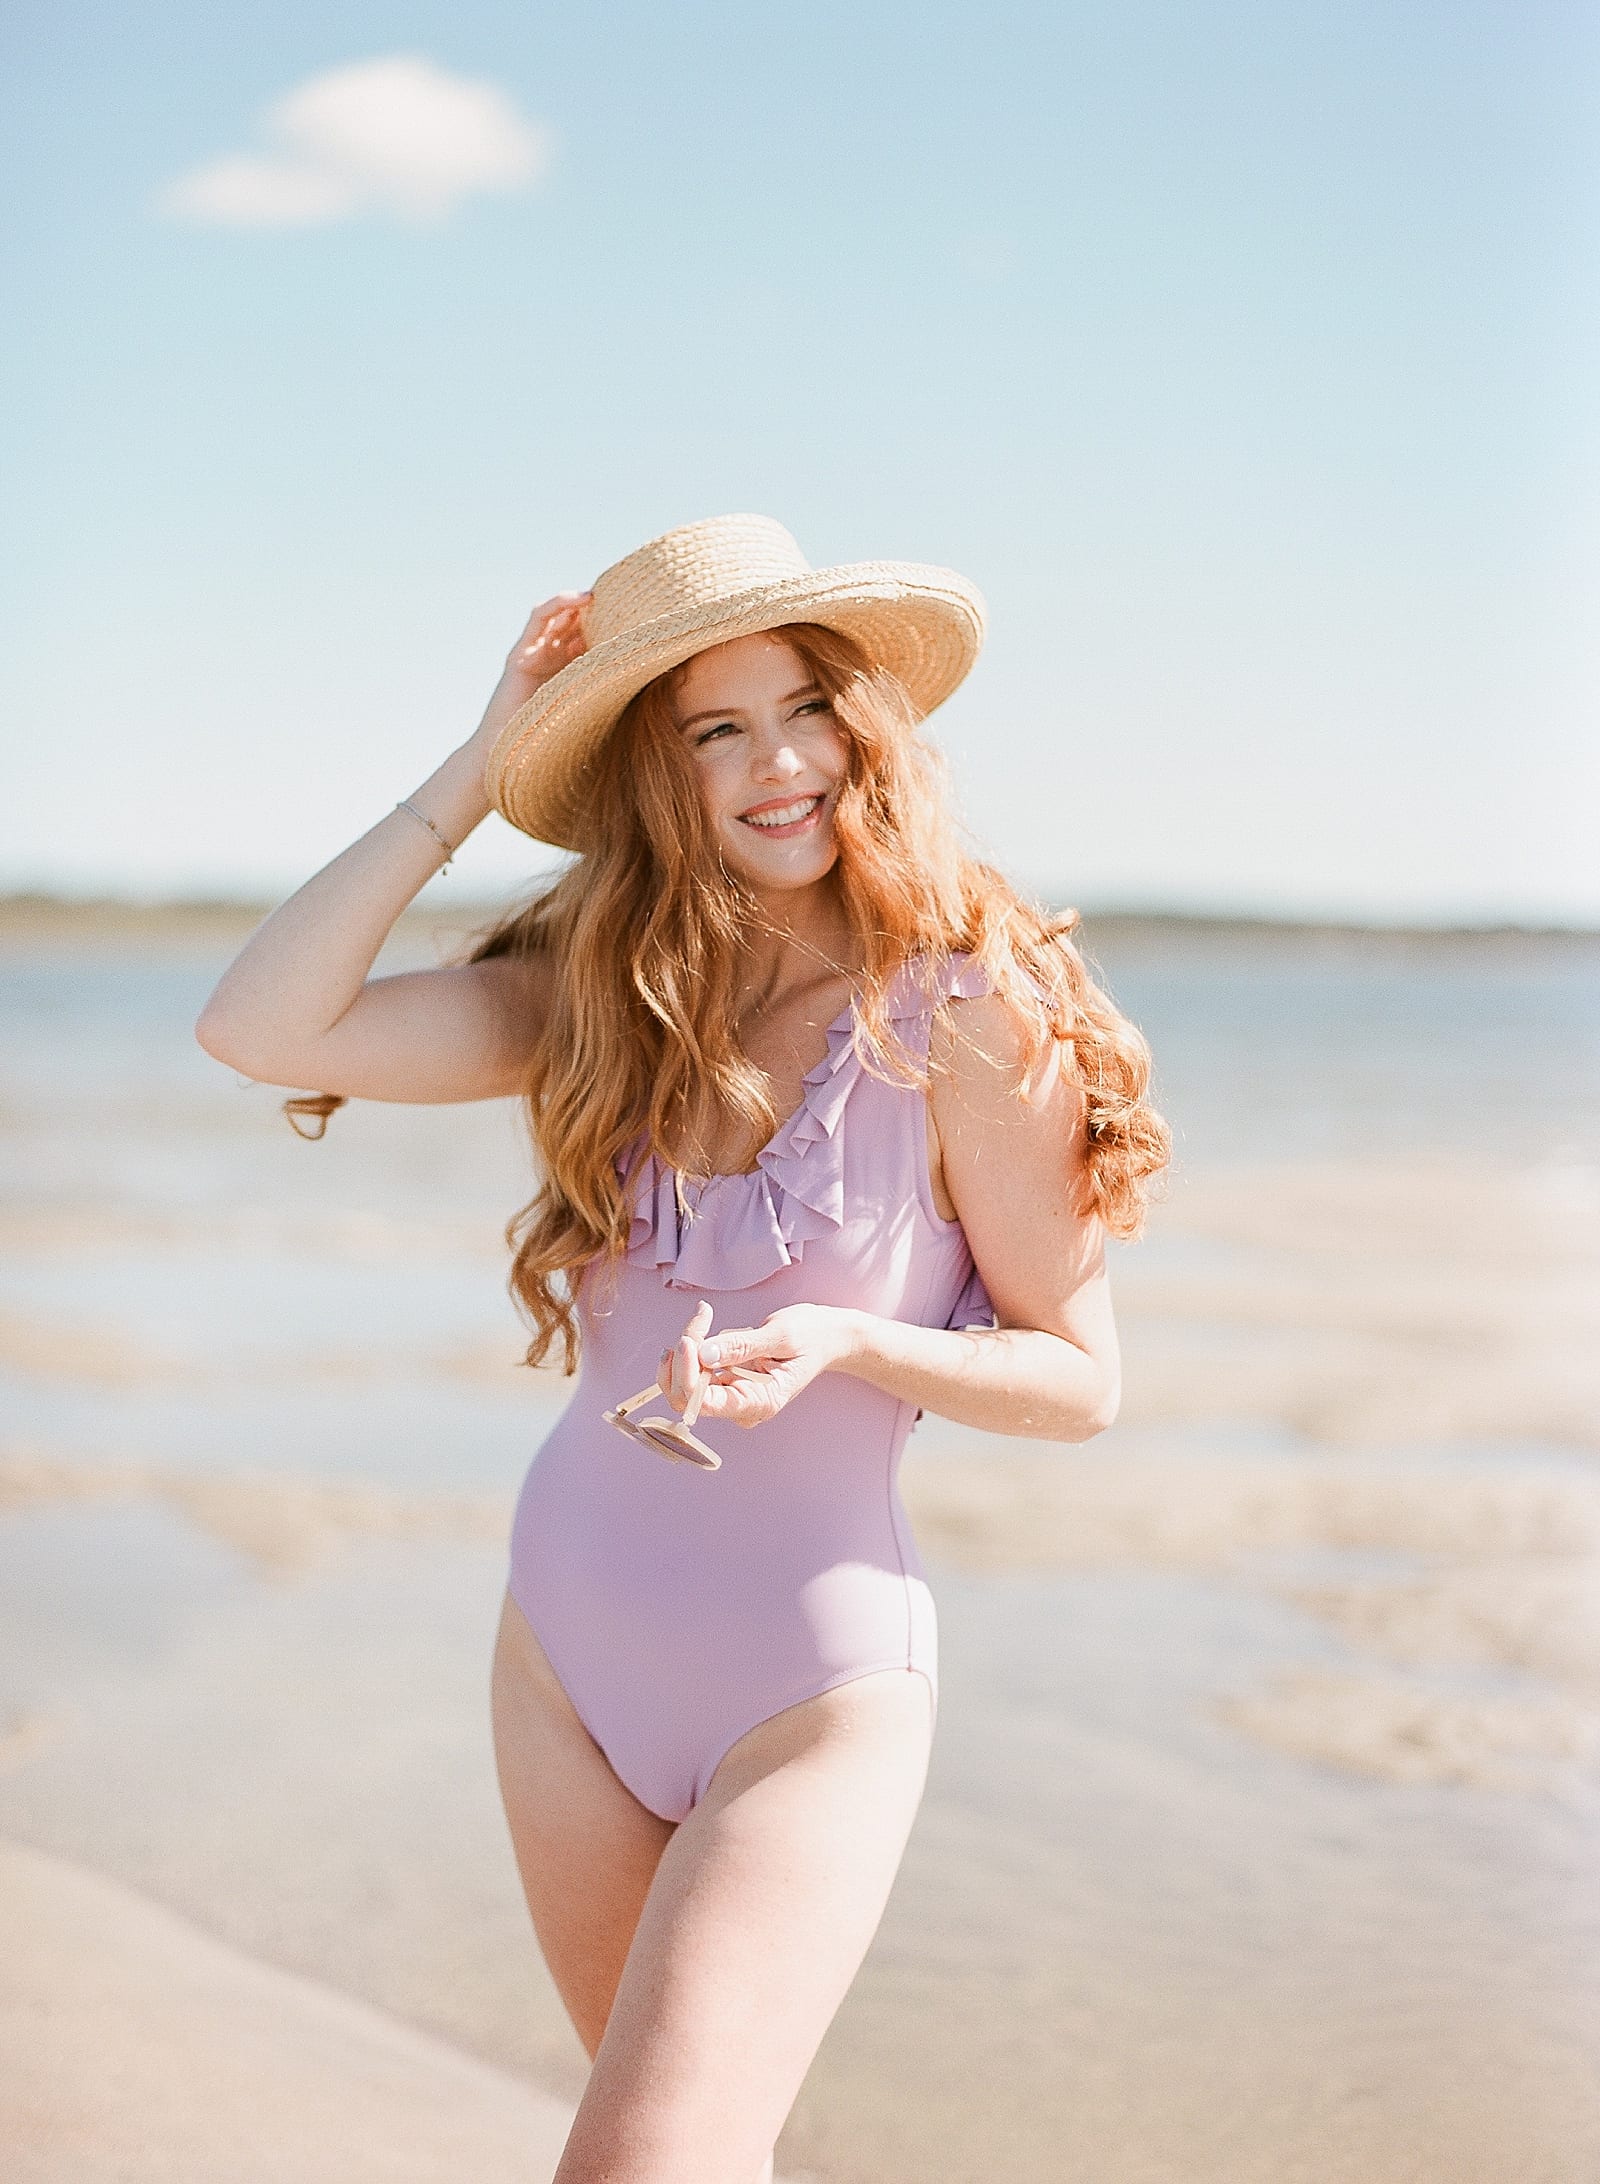 Beaufort SC Girl in Purple Suit with Straw Hat Photo